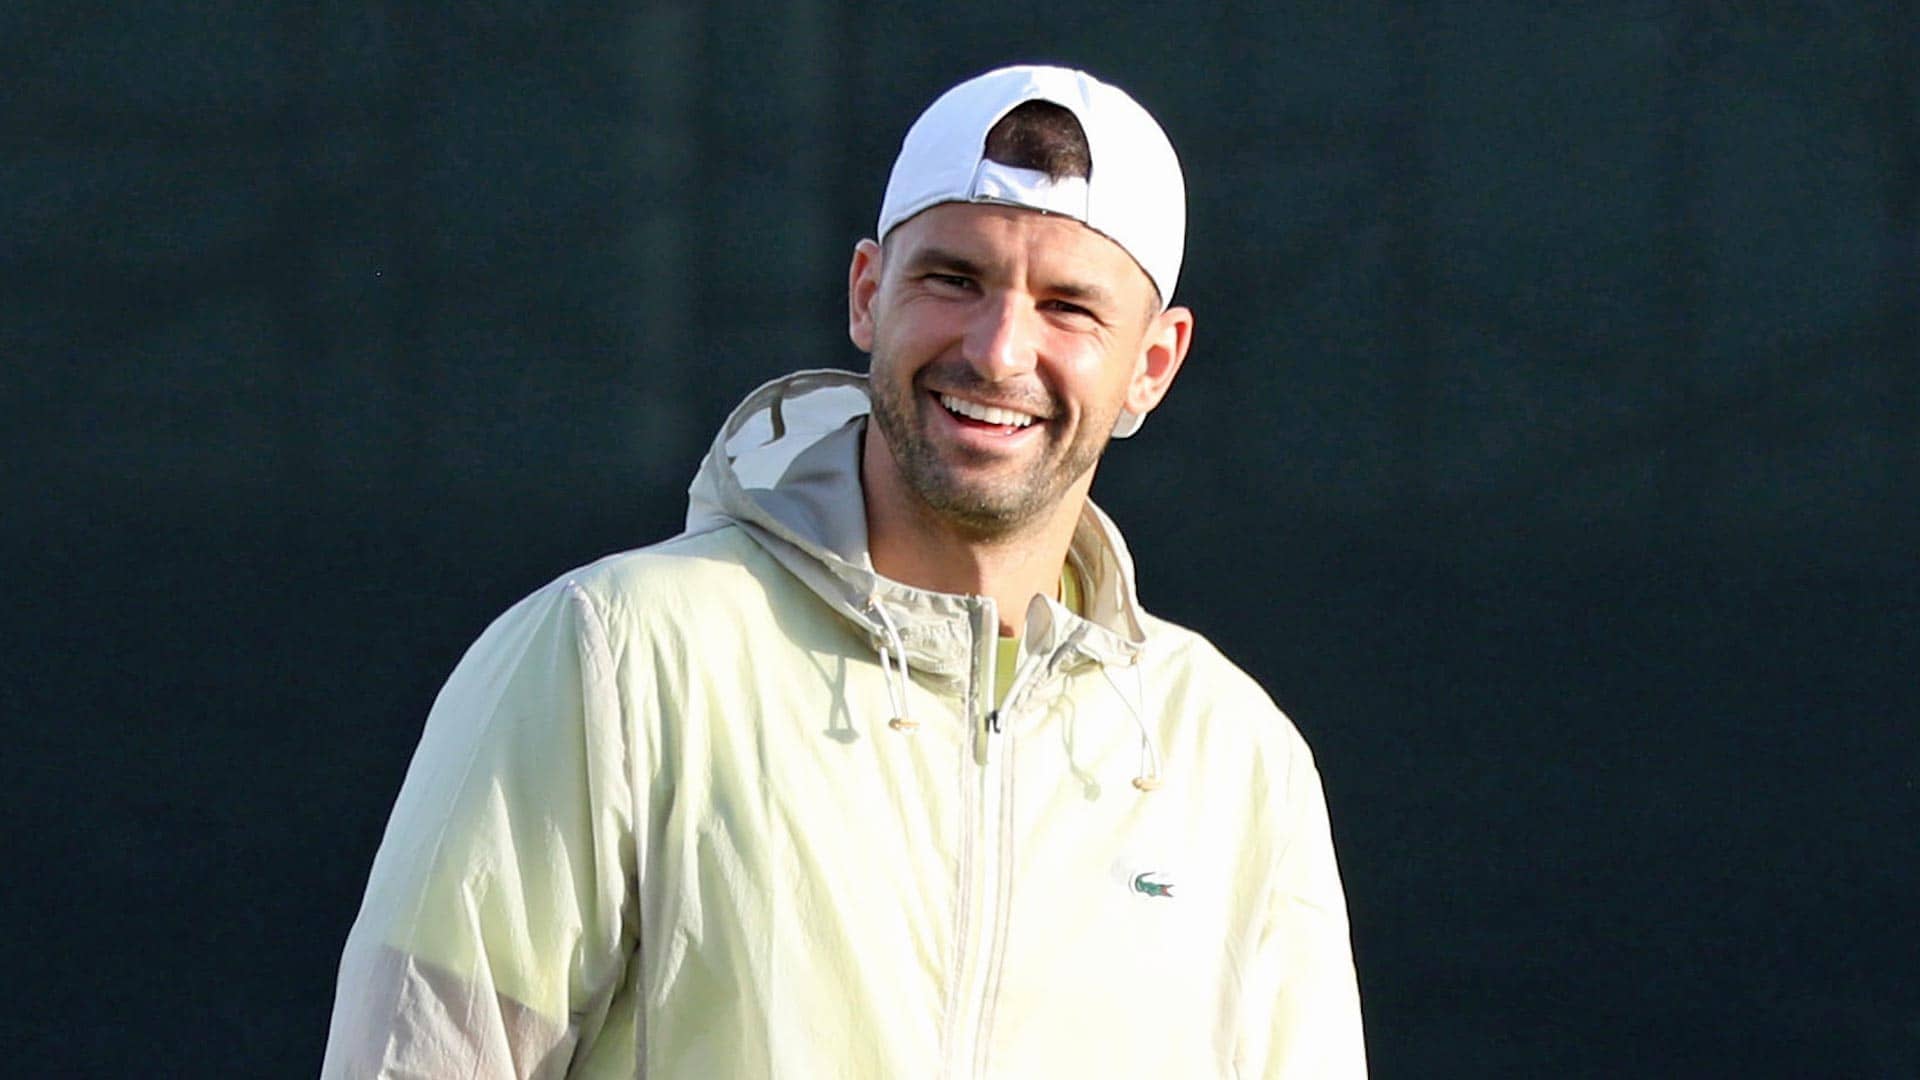 'I hope you're satisfied!': Dimitrov tackles teasing questions from Djokovic & more